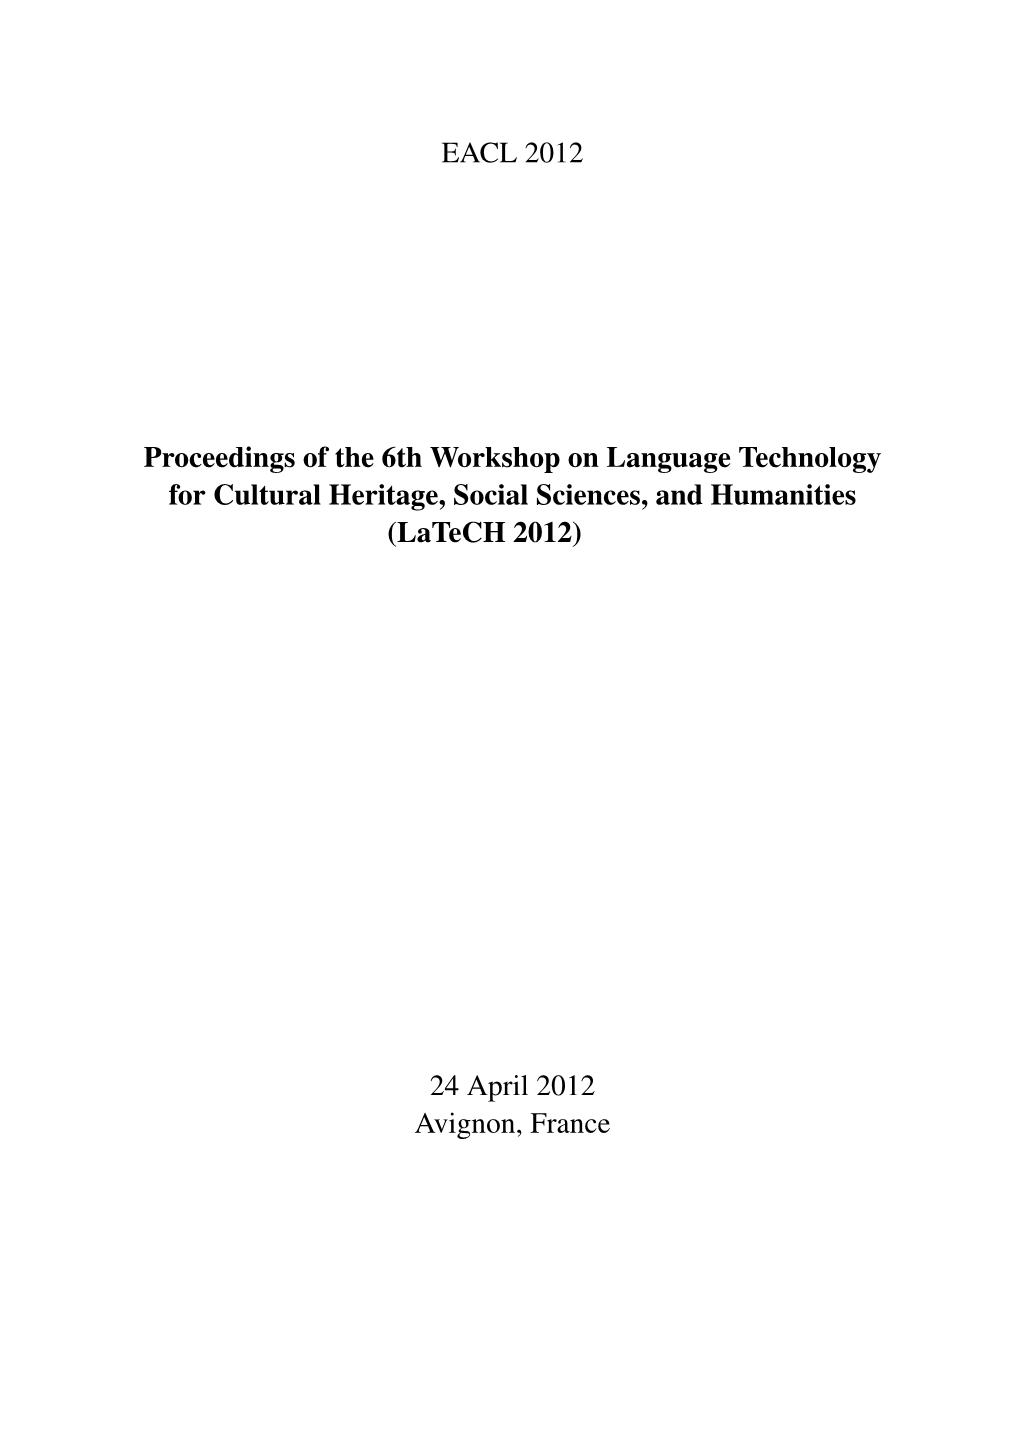 Proceedings of the 6Th Workshop on Language Technology for Cultural Heritage, Social Sciences, and Humanities (Latech 2012)